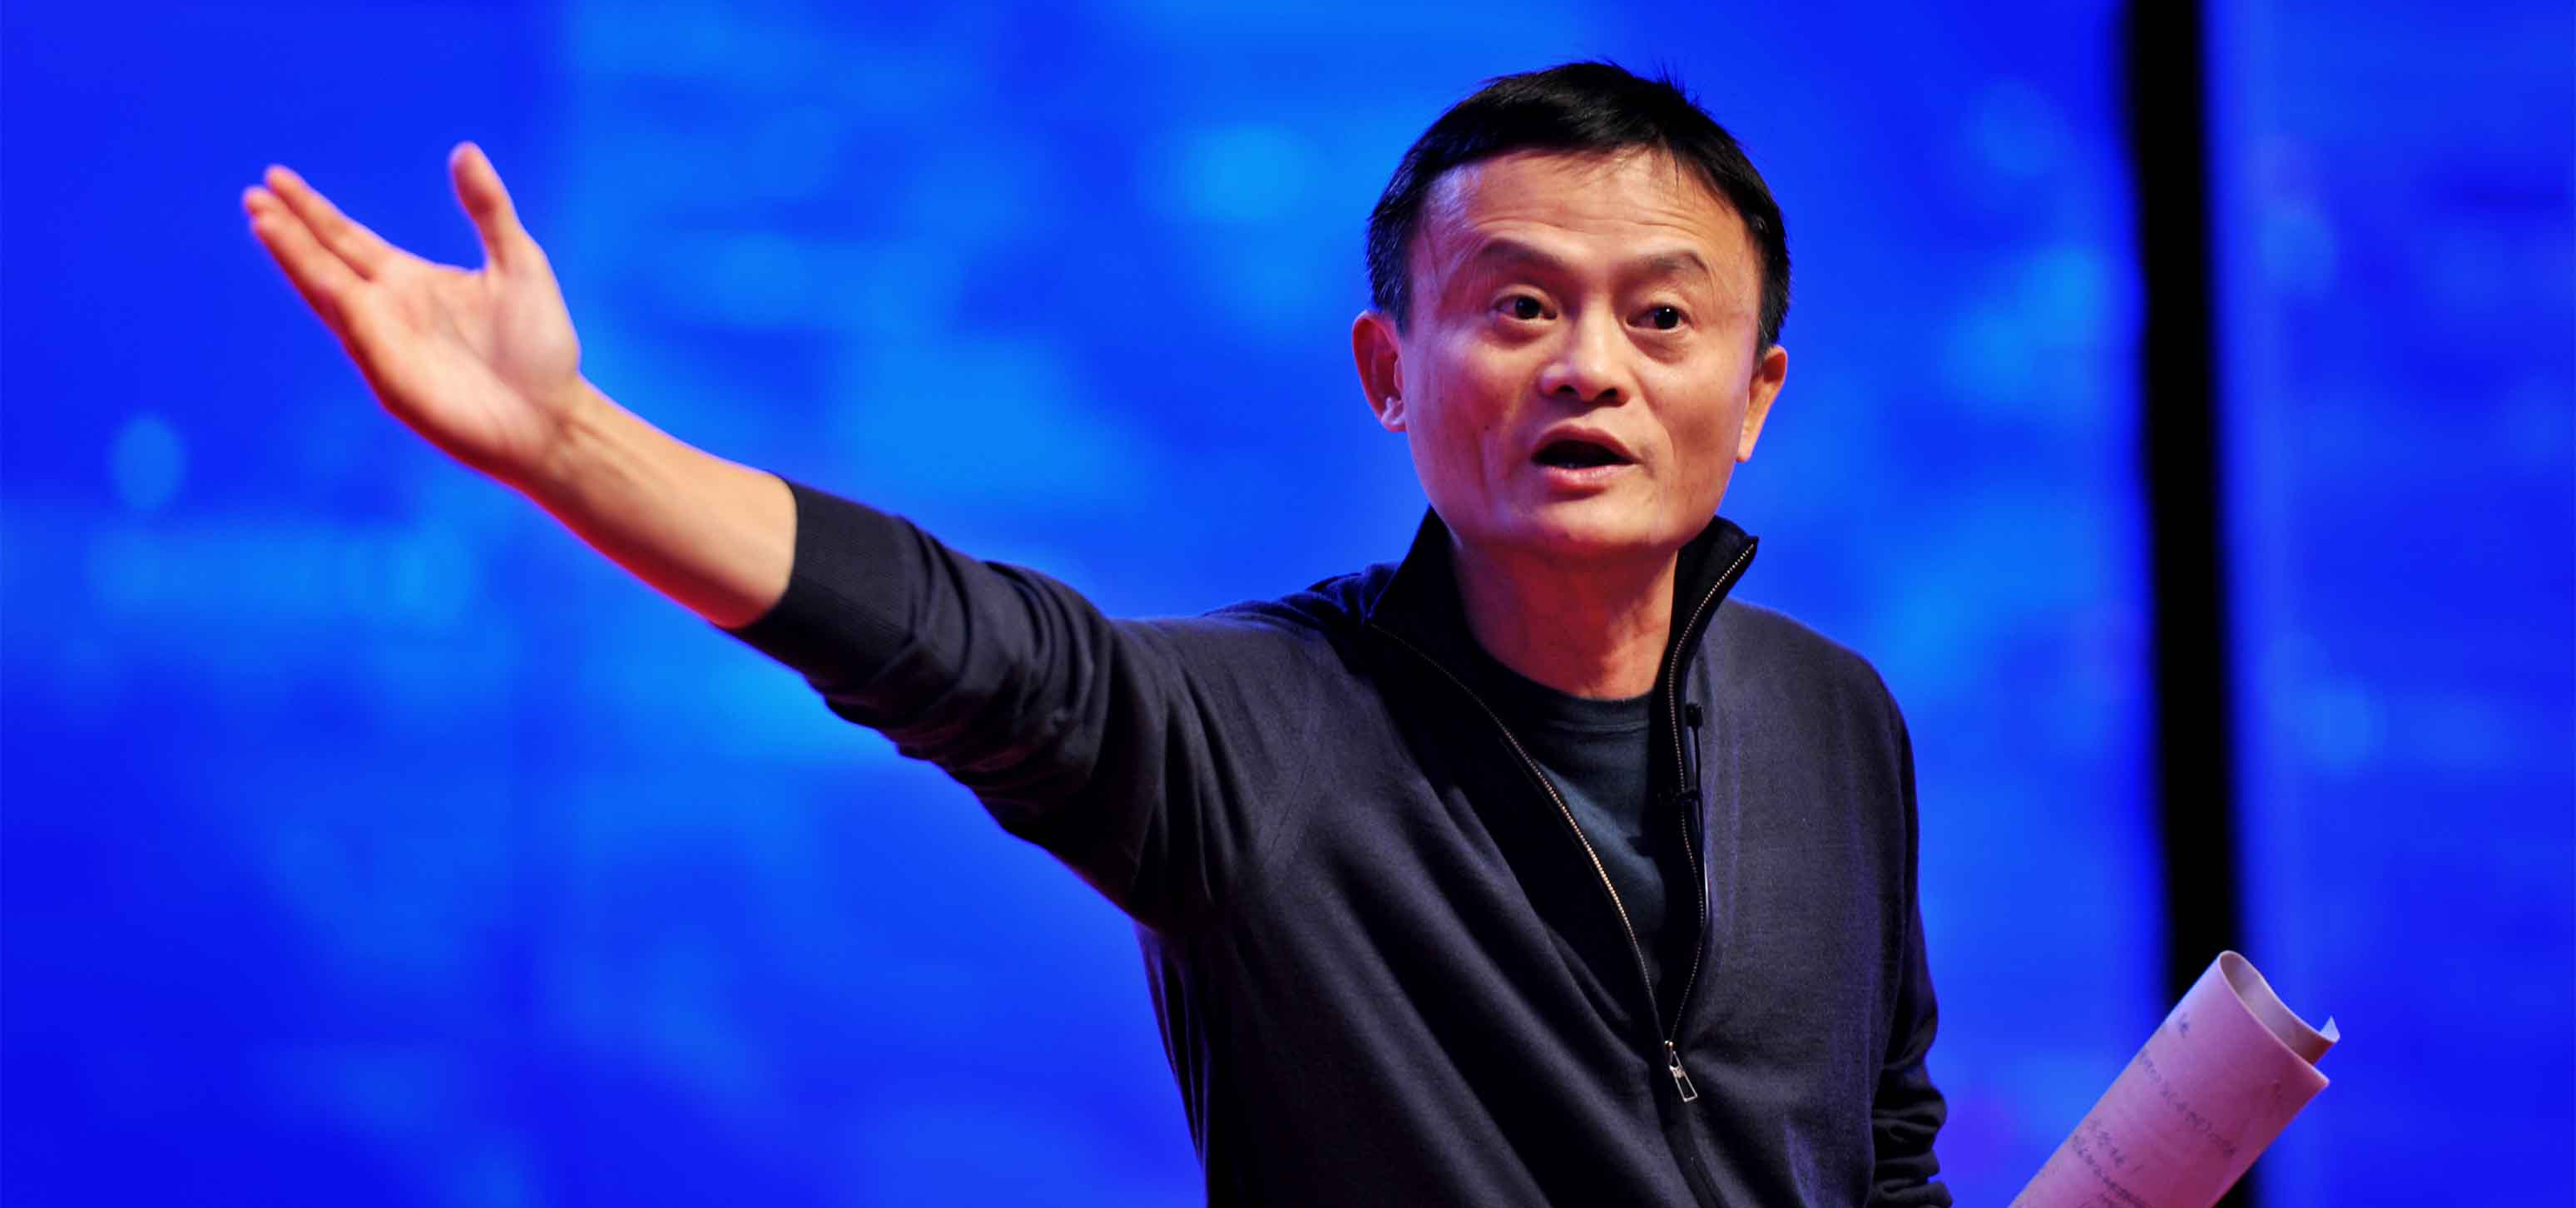 The founder of Alibaba pointed out that many opinions on the subject come from speculators who see the block chain as a gold mine, instead of considering its potential